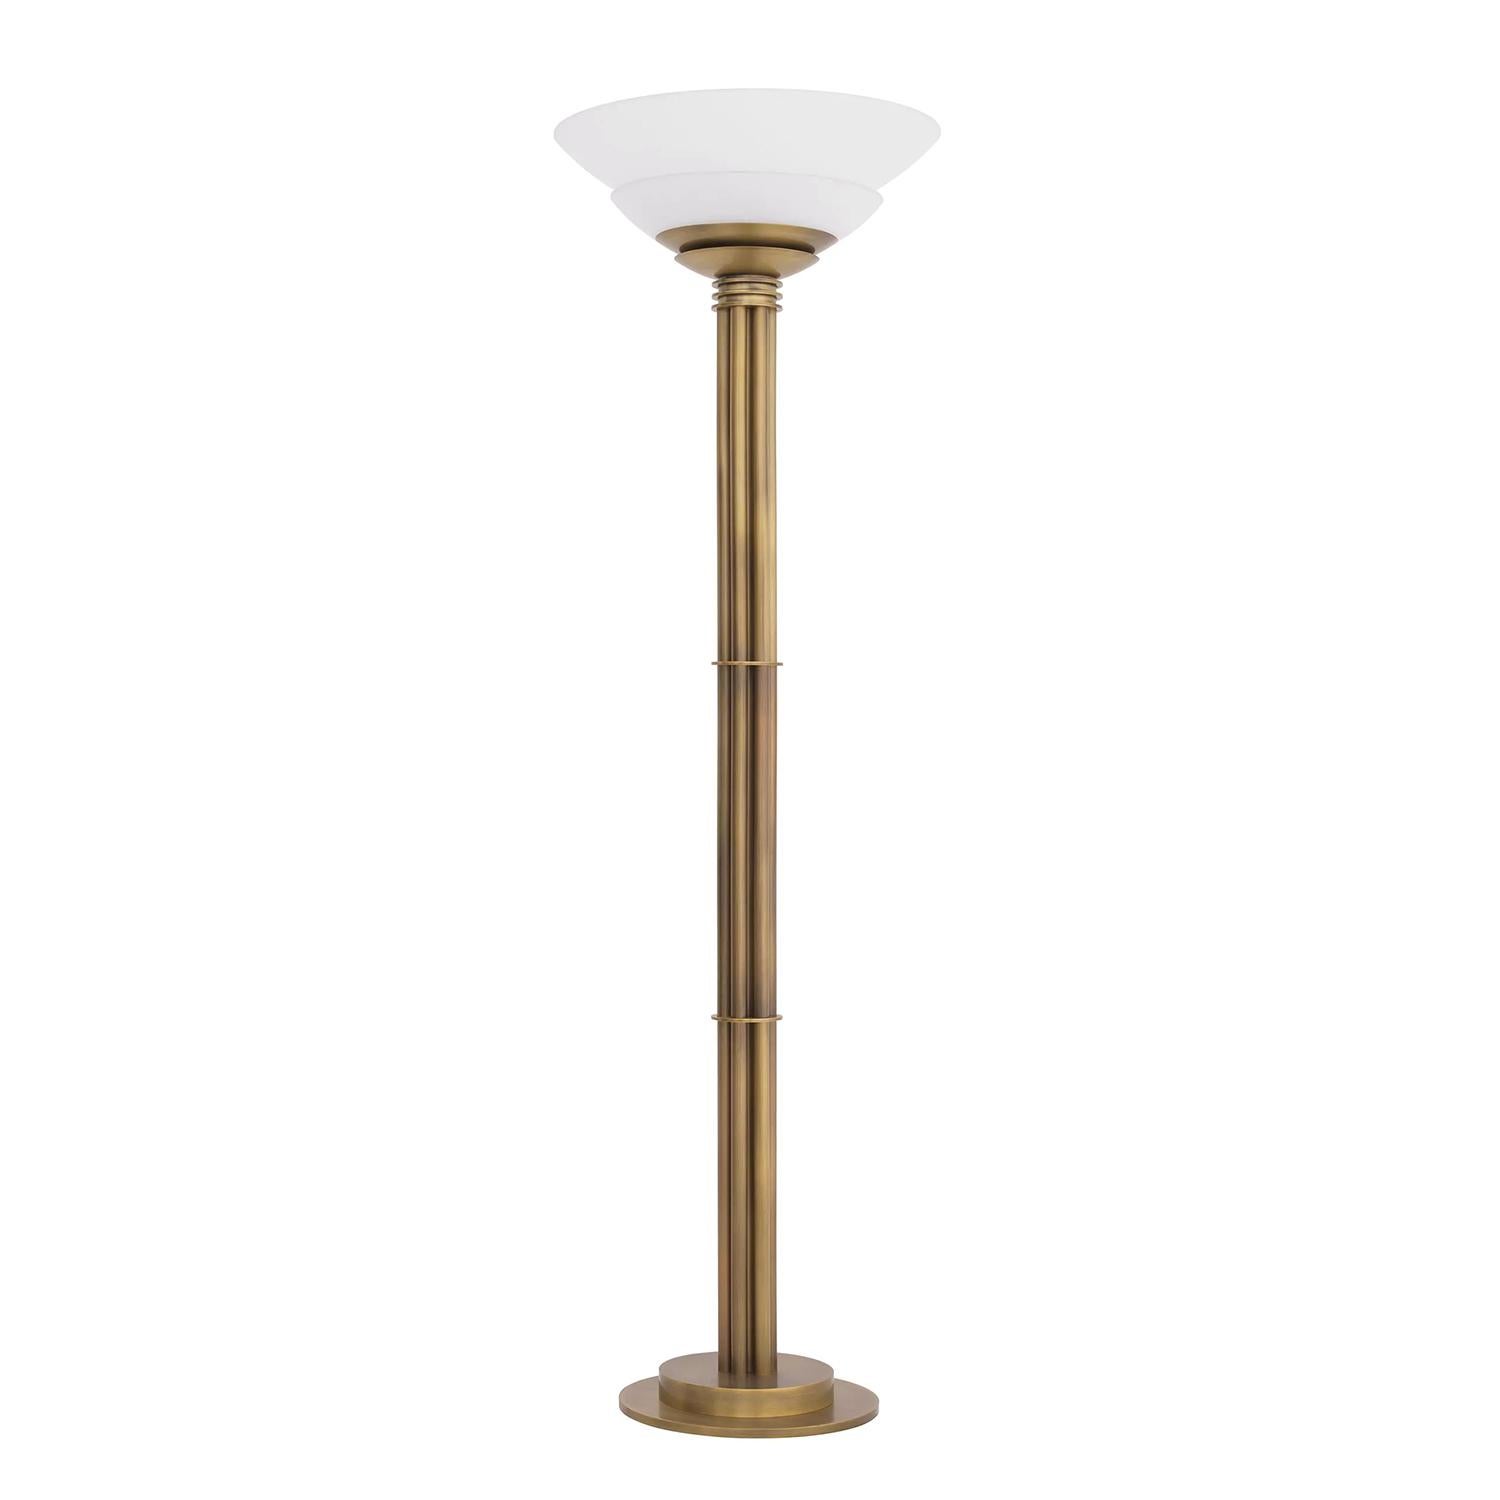 Floor lamp Chianto brass all in brass and iron in antique finish
with frosted glass shade. 1 Bulb, lamp holder type E27, 100 Watt,
200-240 volt. Bulb not included.